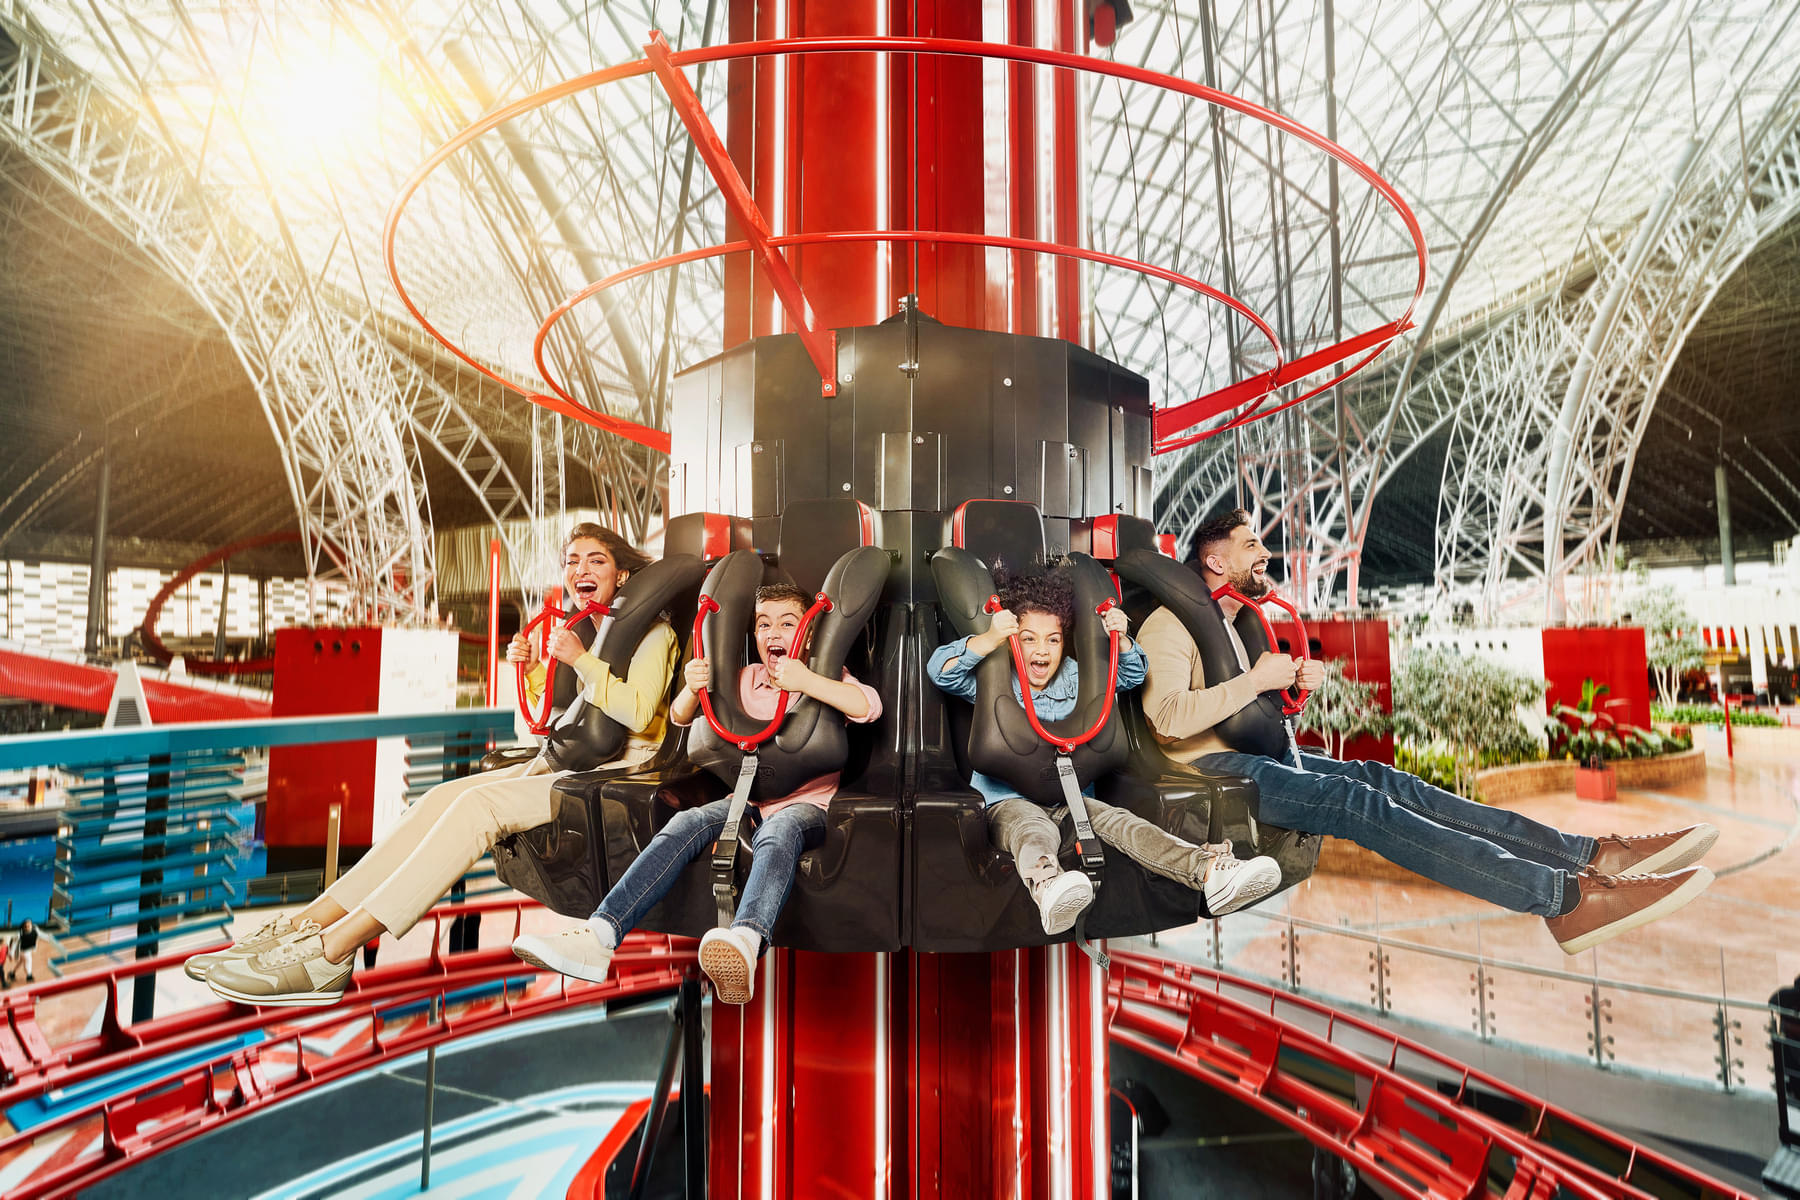 There is a wide range of kid-friendly rides in the family zone